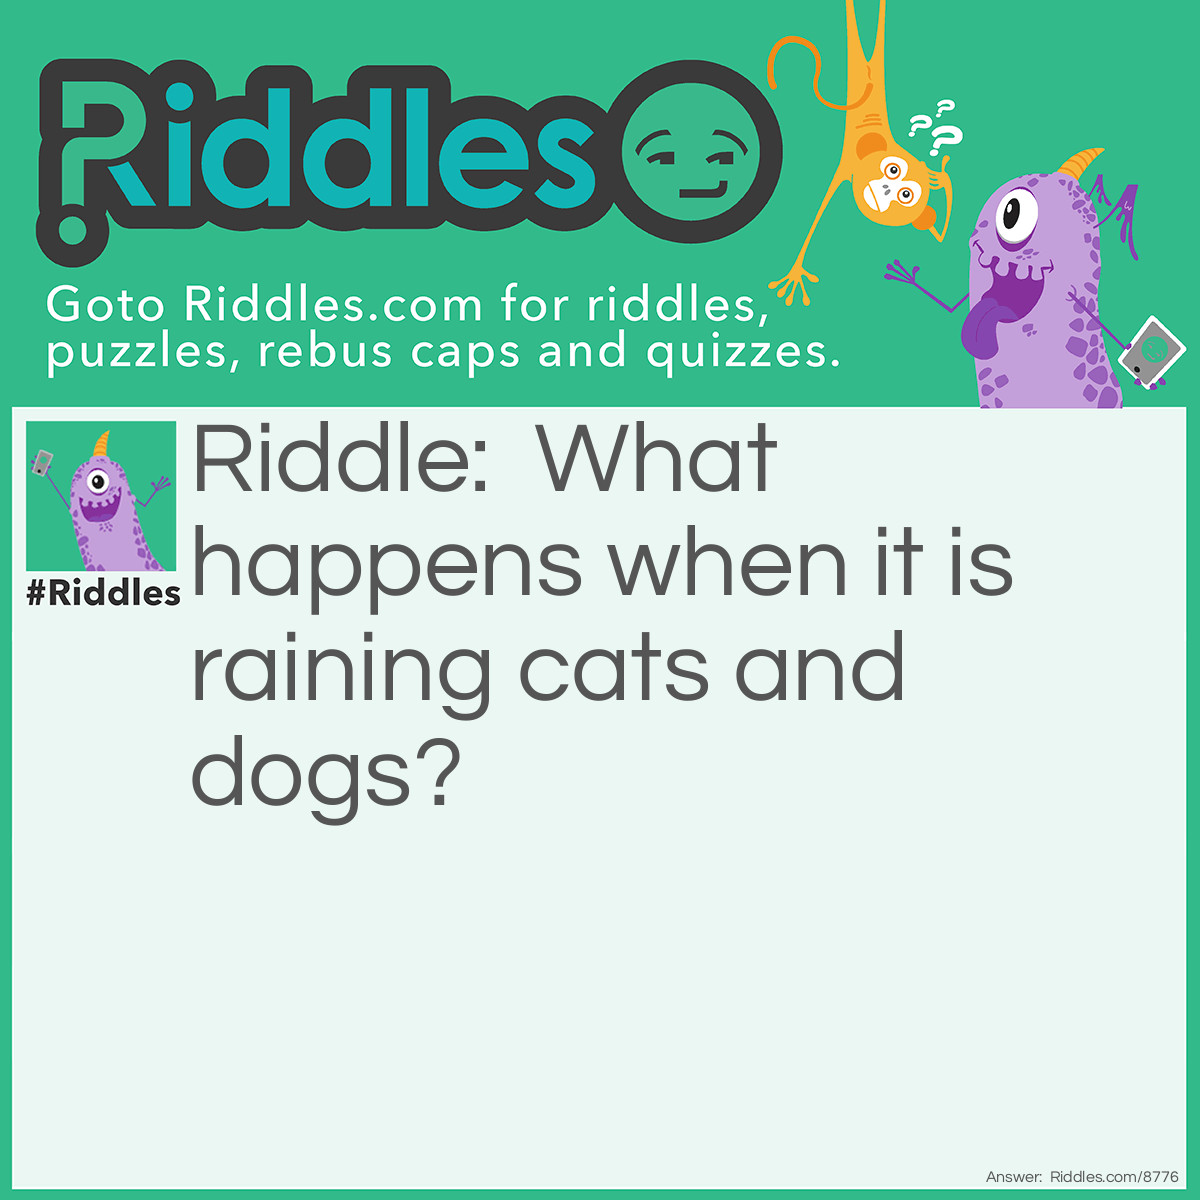 Riddle: What happens when it is raining cats and dogs? Answer: You step into a poo-dle!